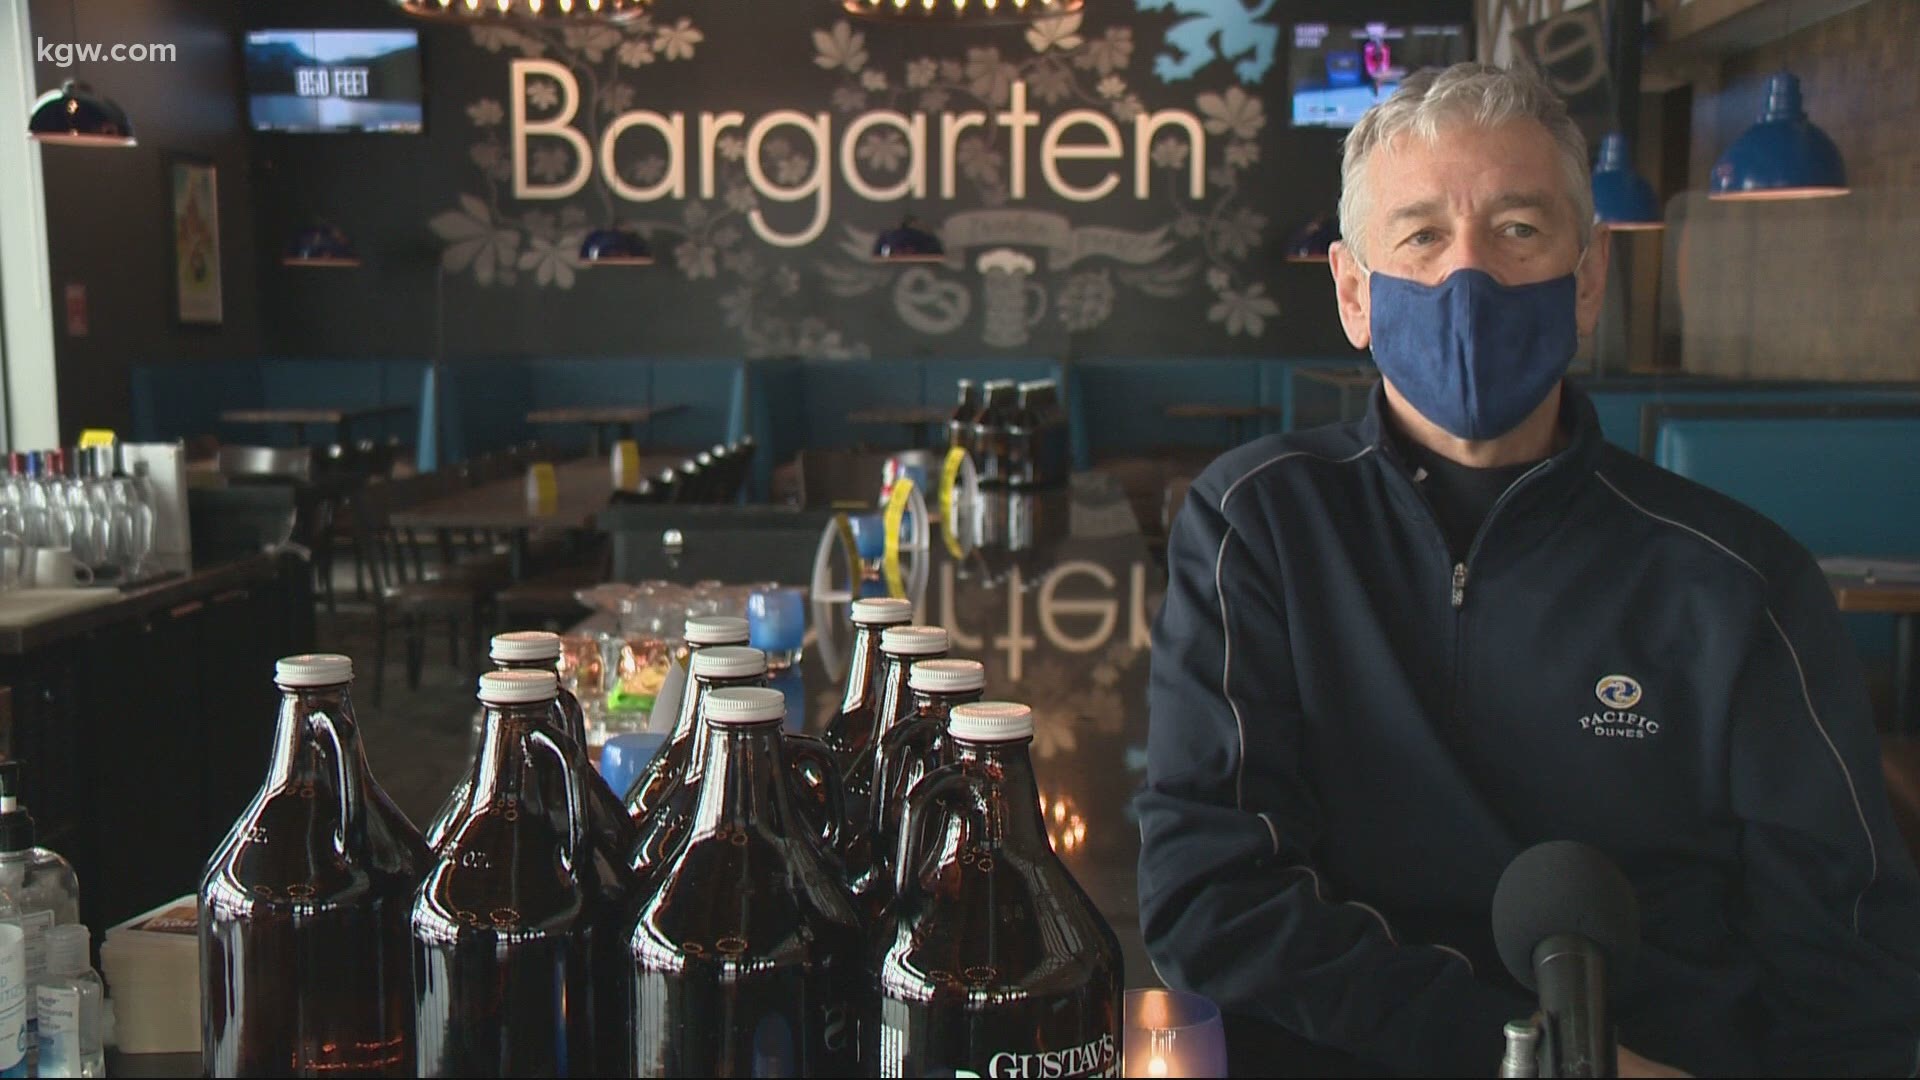 Bargarten in Beaverton received a $2,000 tip on the first day it reopened, after being closed for about 10 weeks.